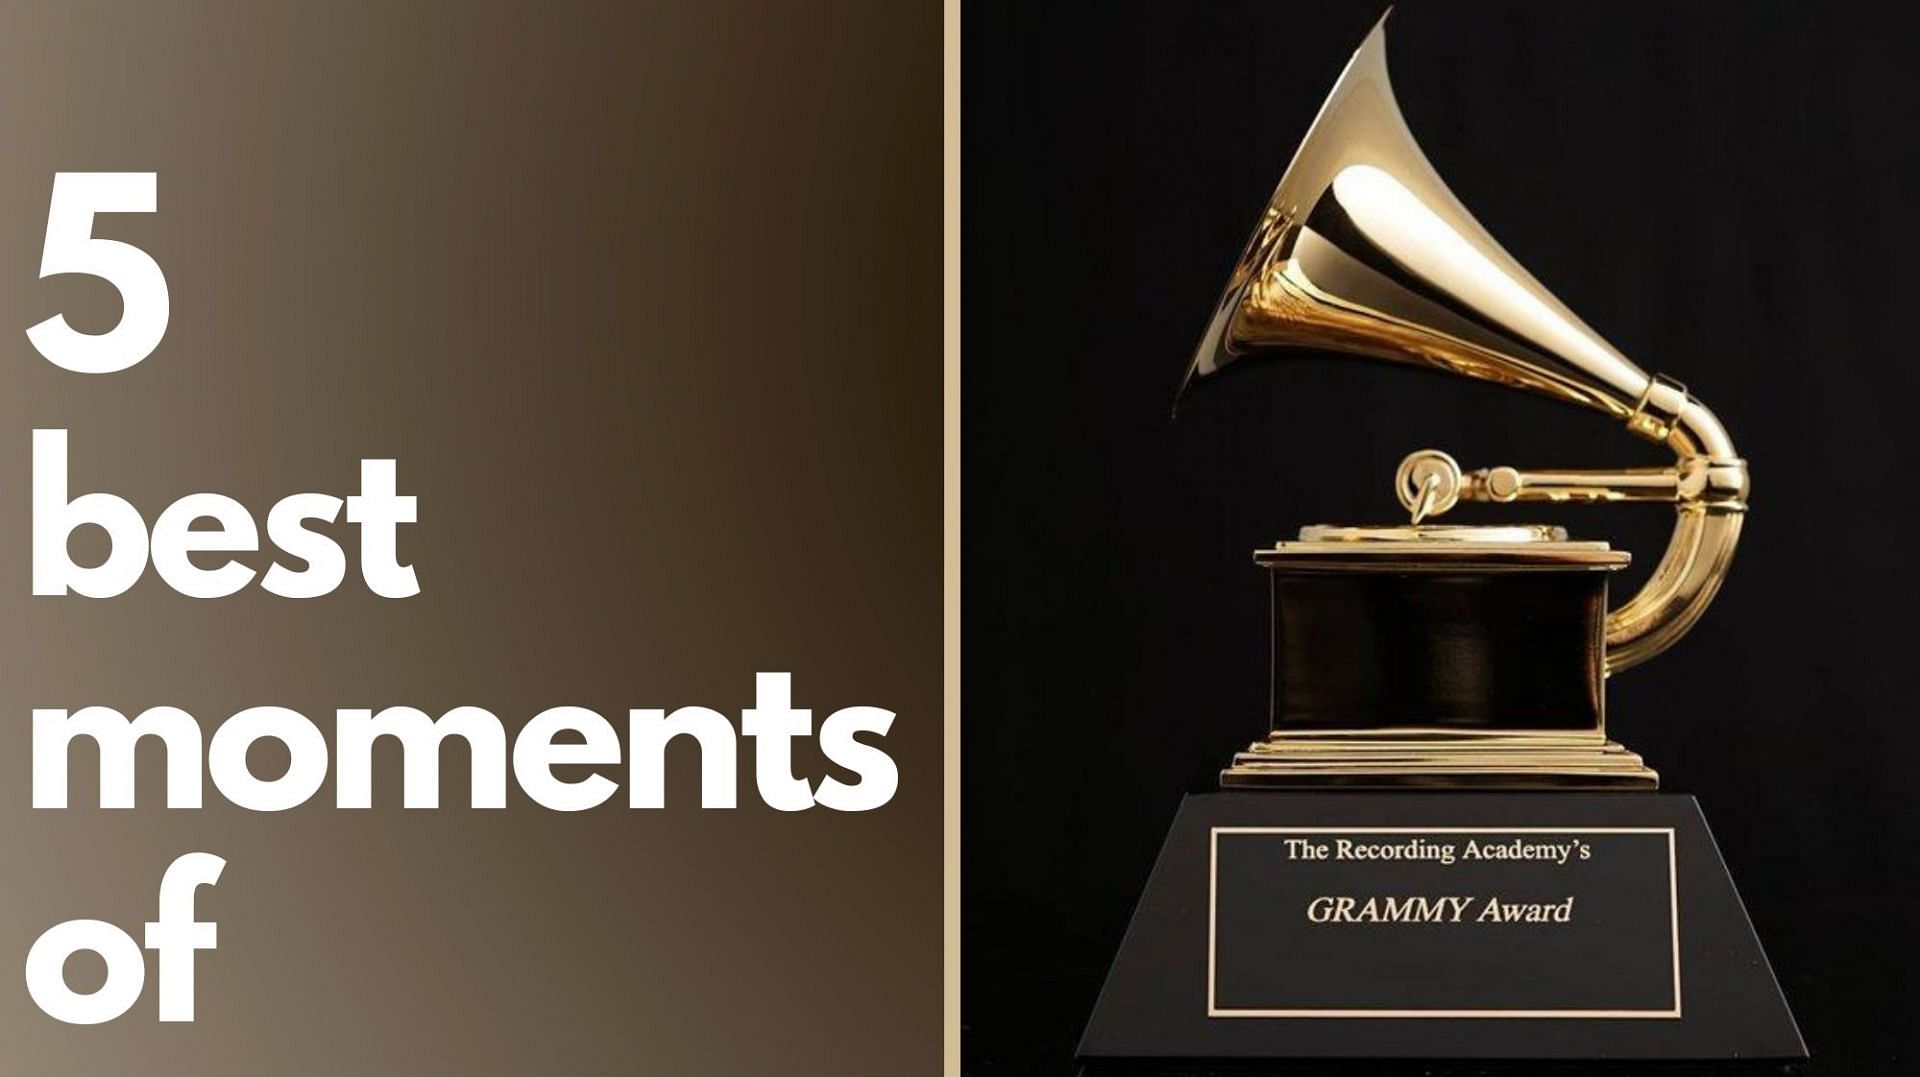 Grammy Awards: 5 best moments of all time (Image via Grammy)